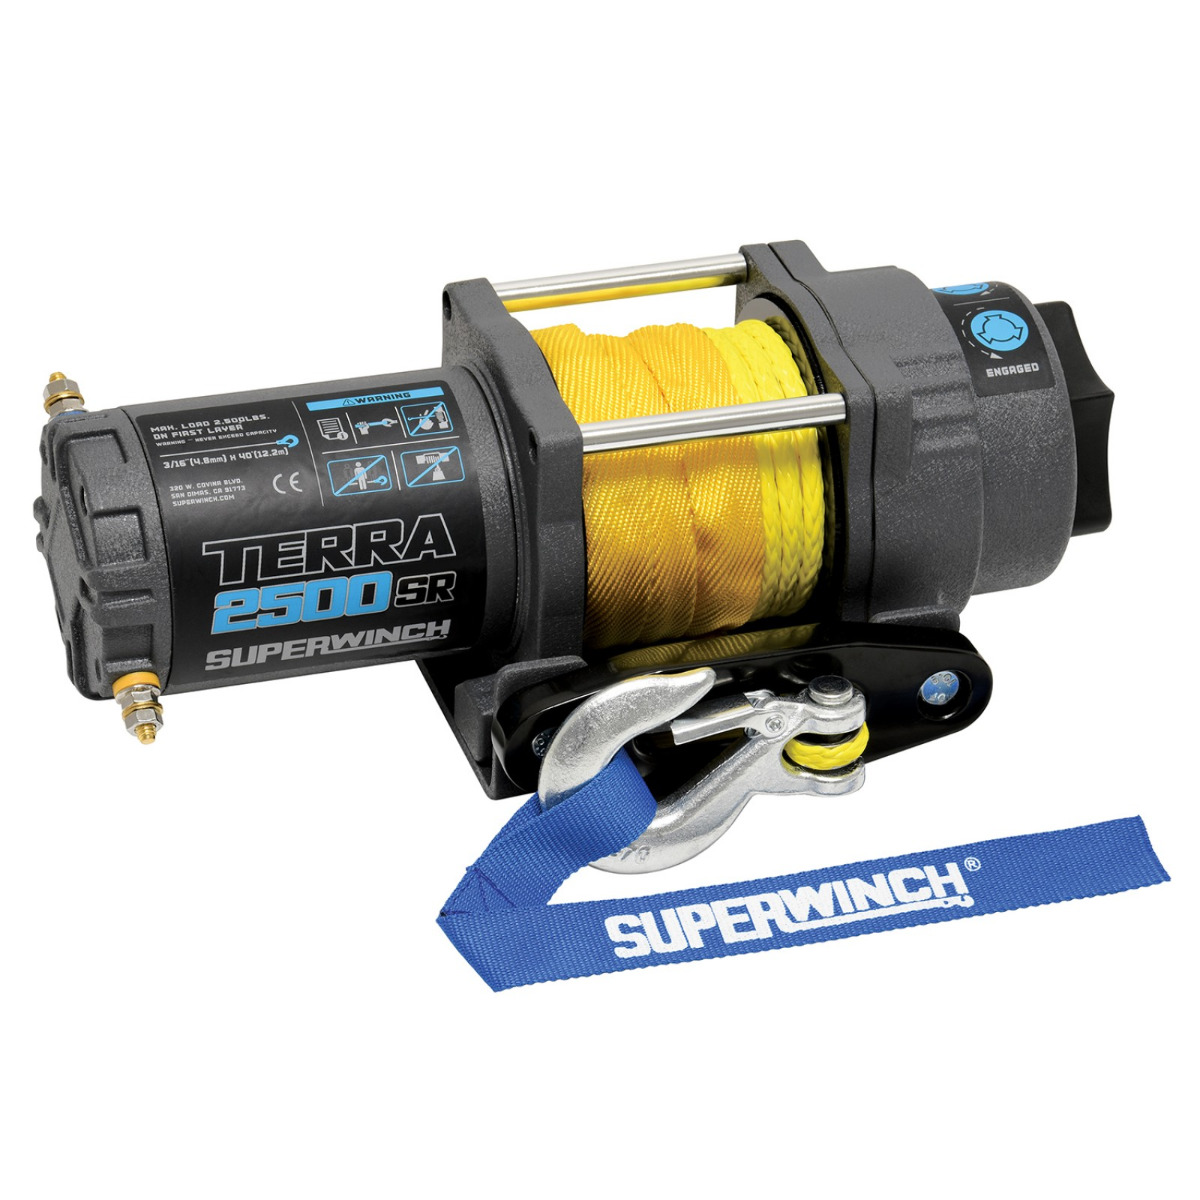 Superwinch Terra 2500SR 12V Synthetic Rope Winch